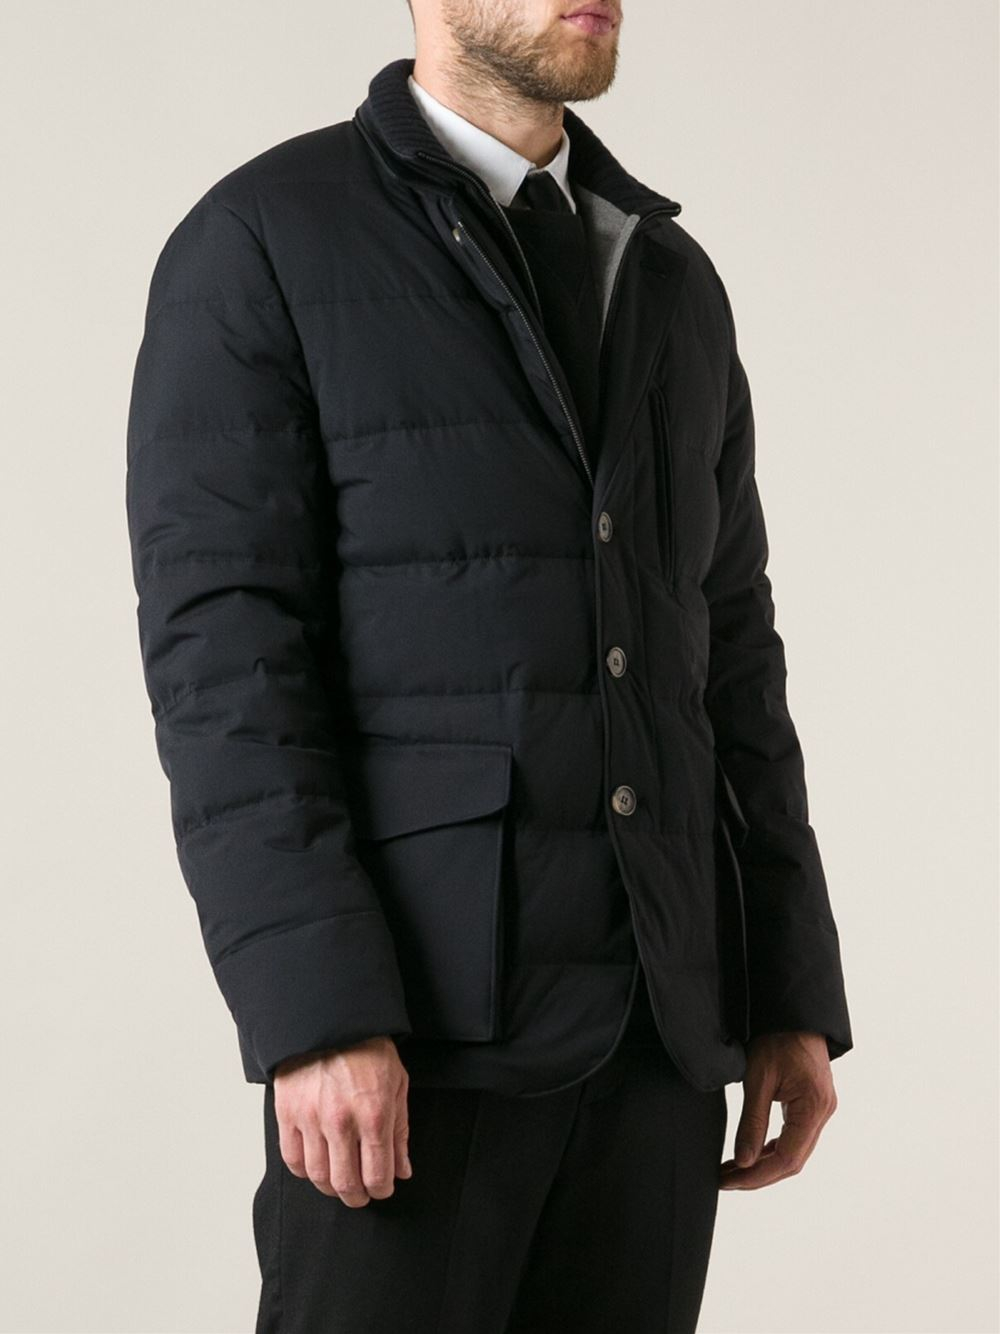 Loro Piana Storm Feather Down Jacket in Black for Men - Lyst